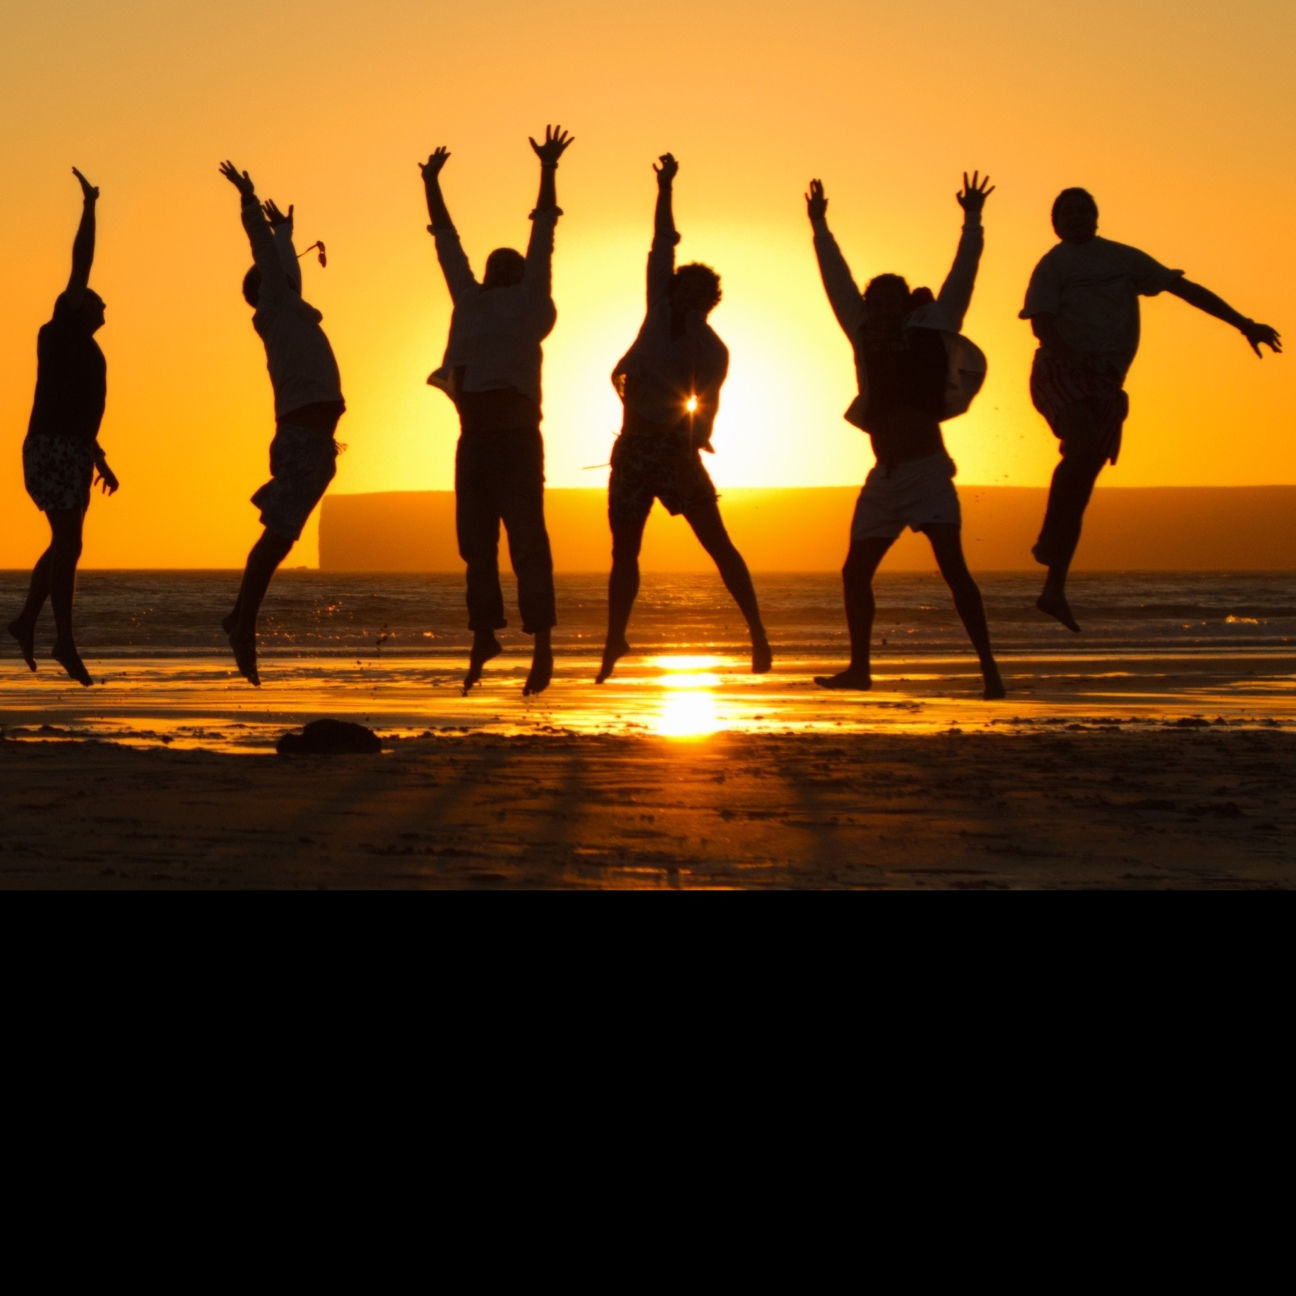 sunset, orange color, silhouette, togetherness, men, leisure activity, lifestyles, enjoyment, large group of people, person, sun, full length, medium group of people, friendship, fun, sea, beach, walking, sunlight